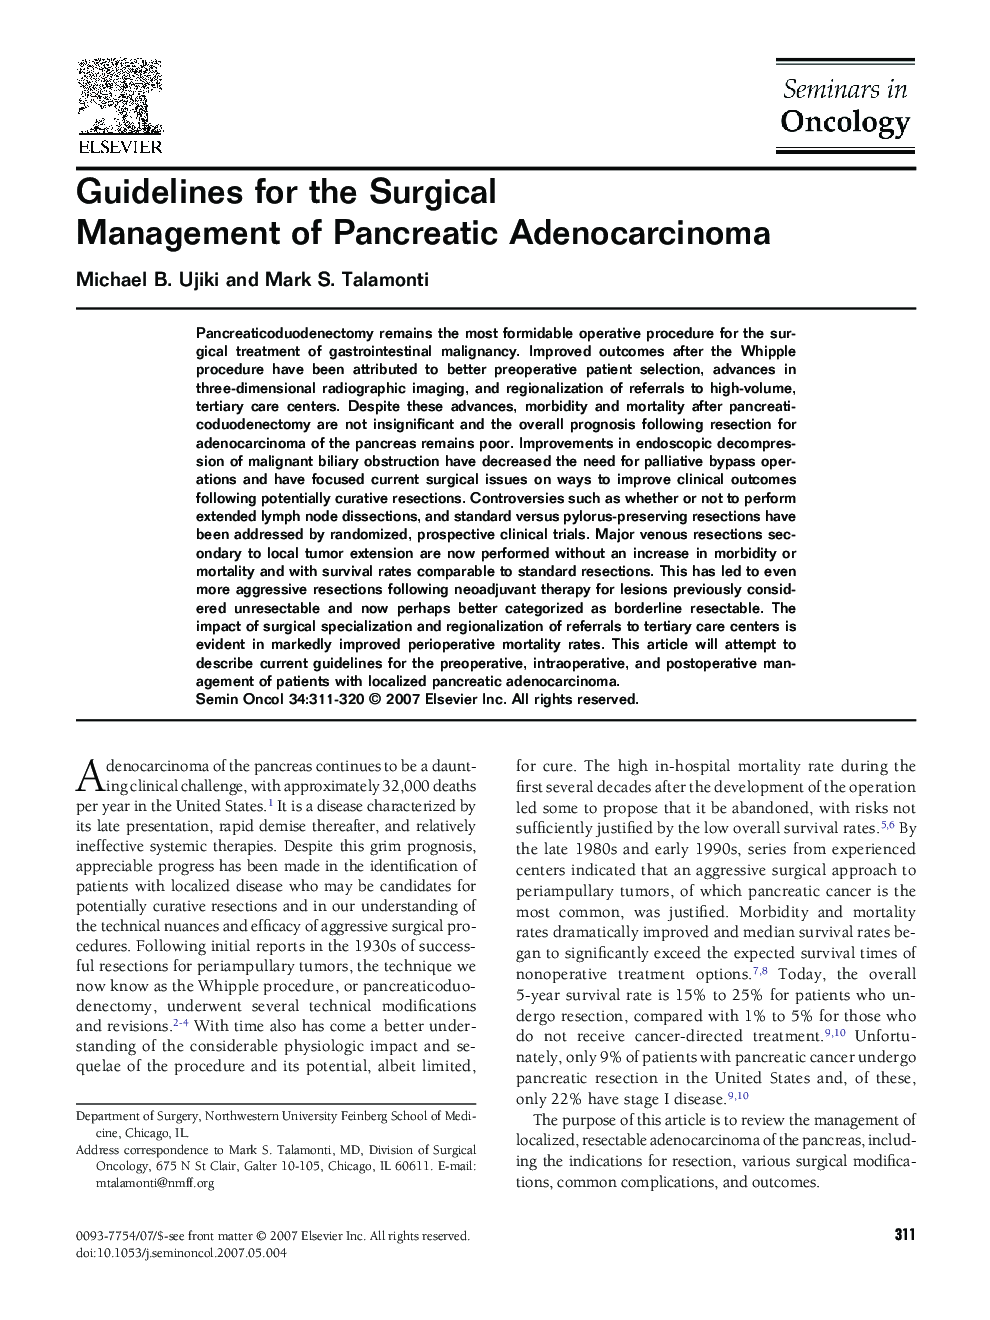 Guidelines for the Surgical Management of Pancreatic Adenocarcinoma